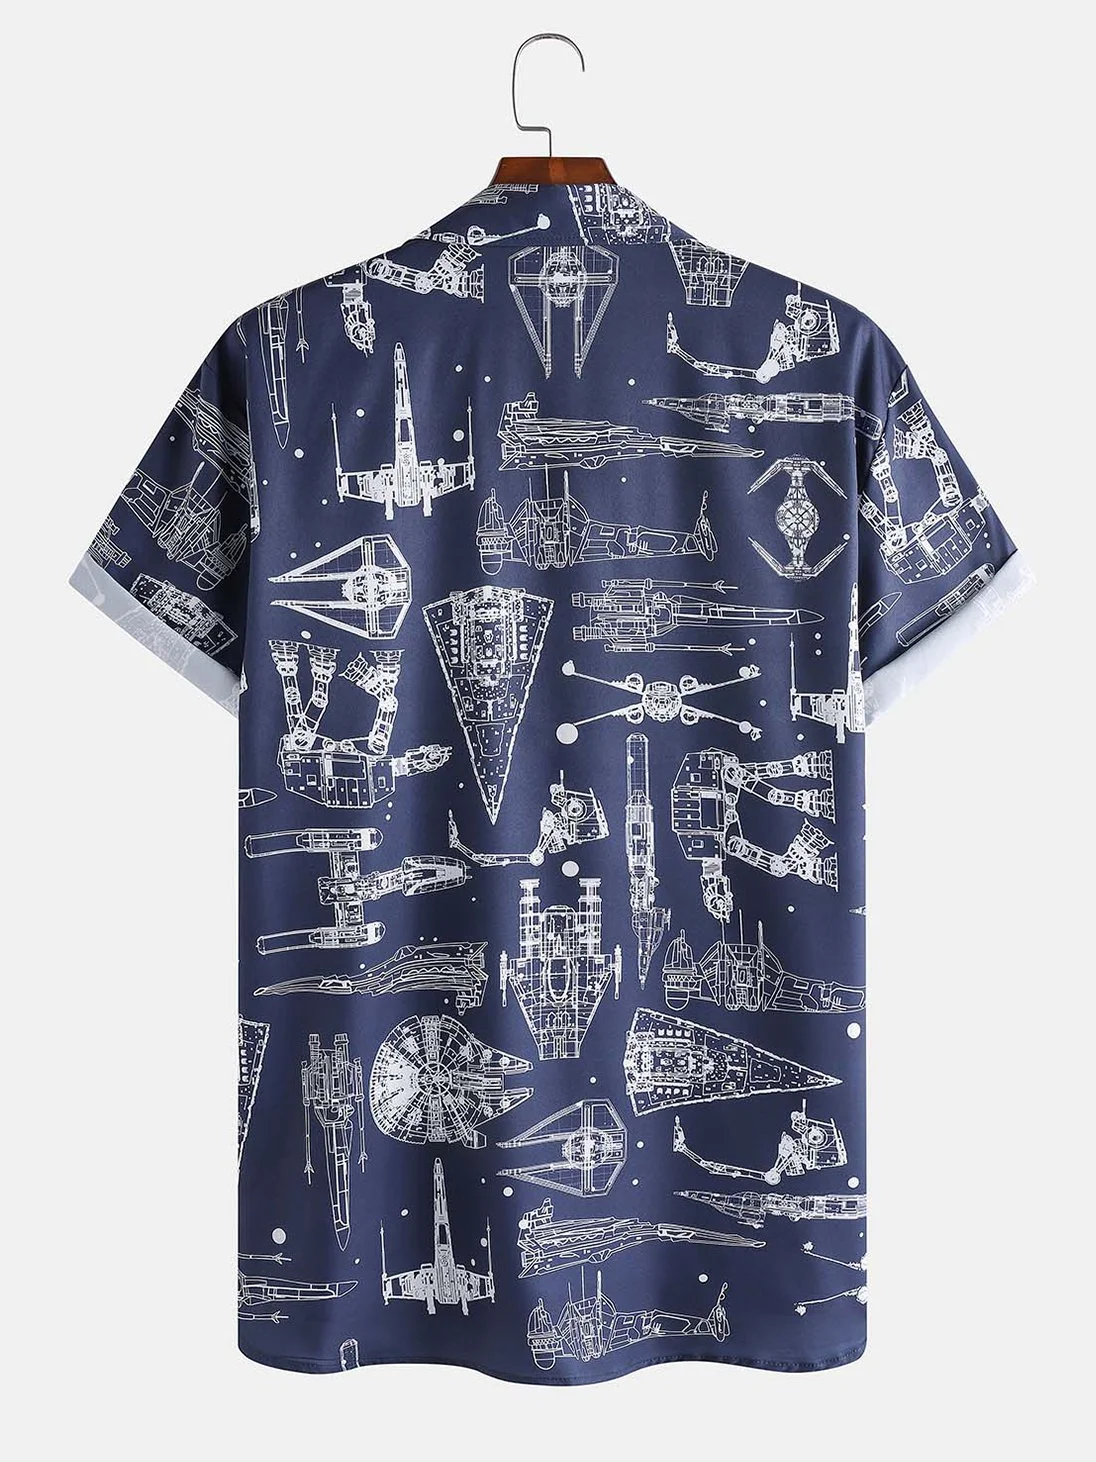 Hardaddy Big Size Universe Space Shuttle Chest Pocket Short Sleeve Casual Shirt